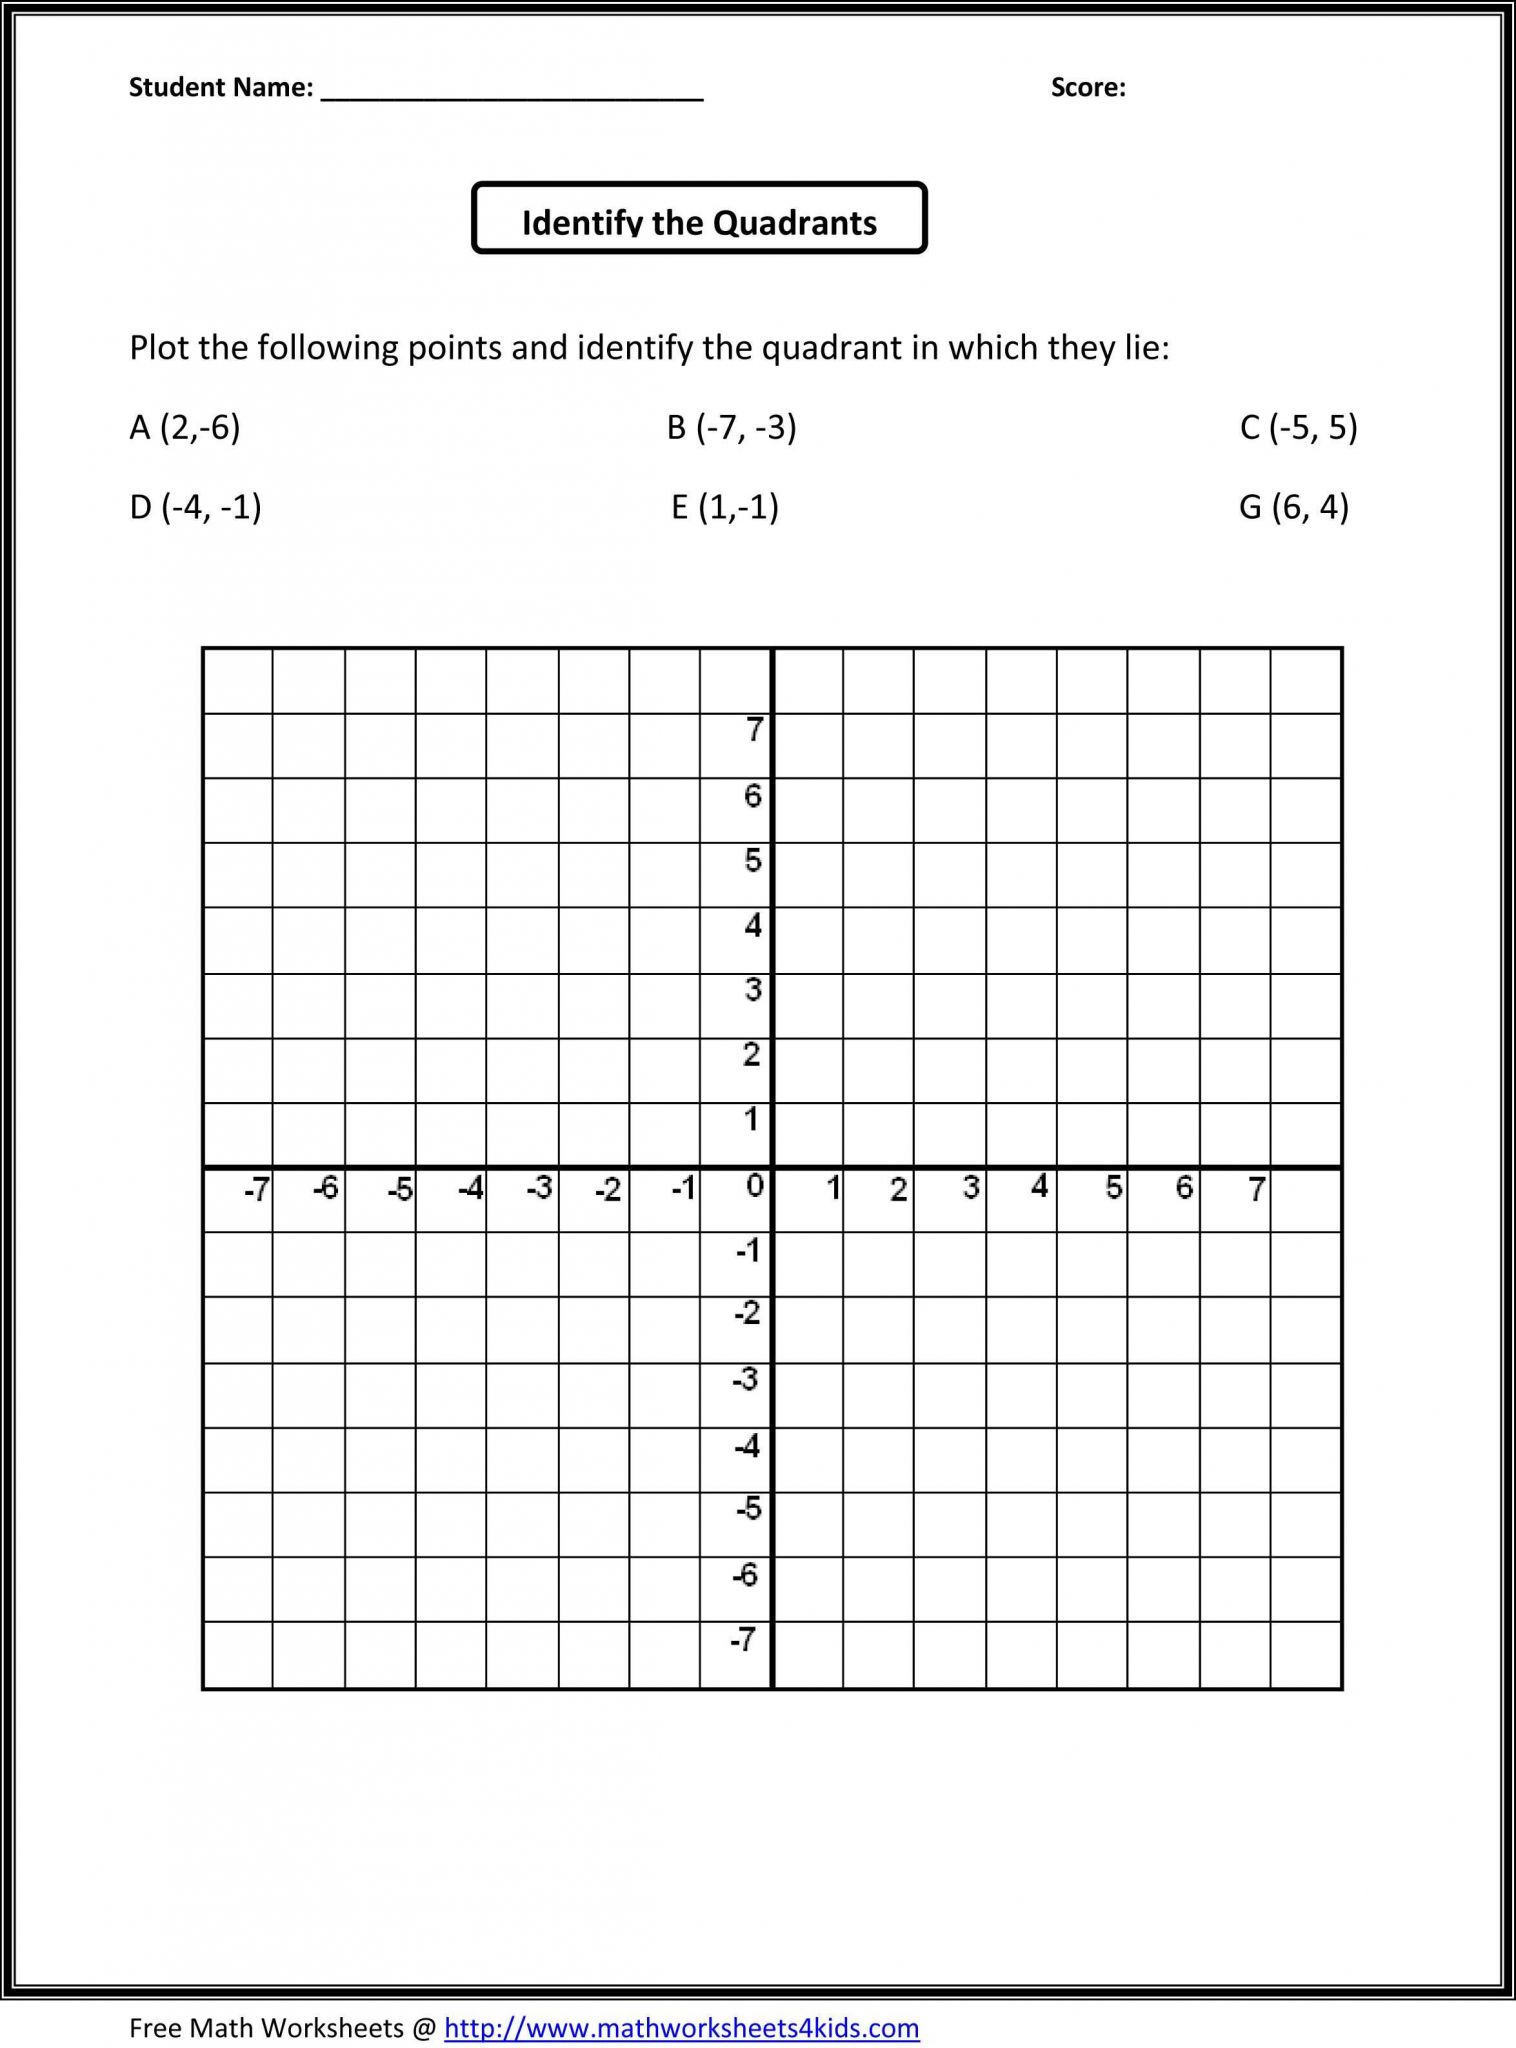 7th Grade Common Core Math Worksheets with Answer Key as Well as Kindergarten Worksheetmmonre 5th Grade Math Worksheets Grass Fedjp